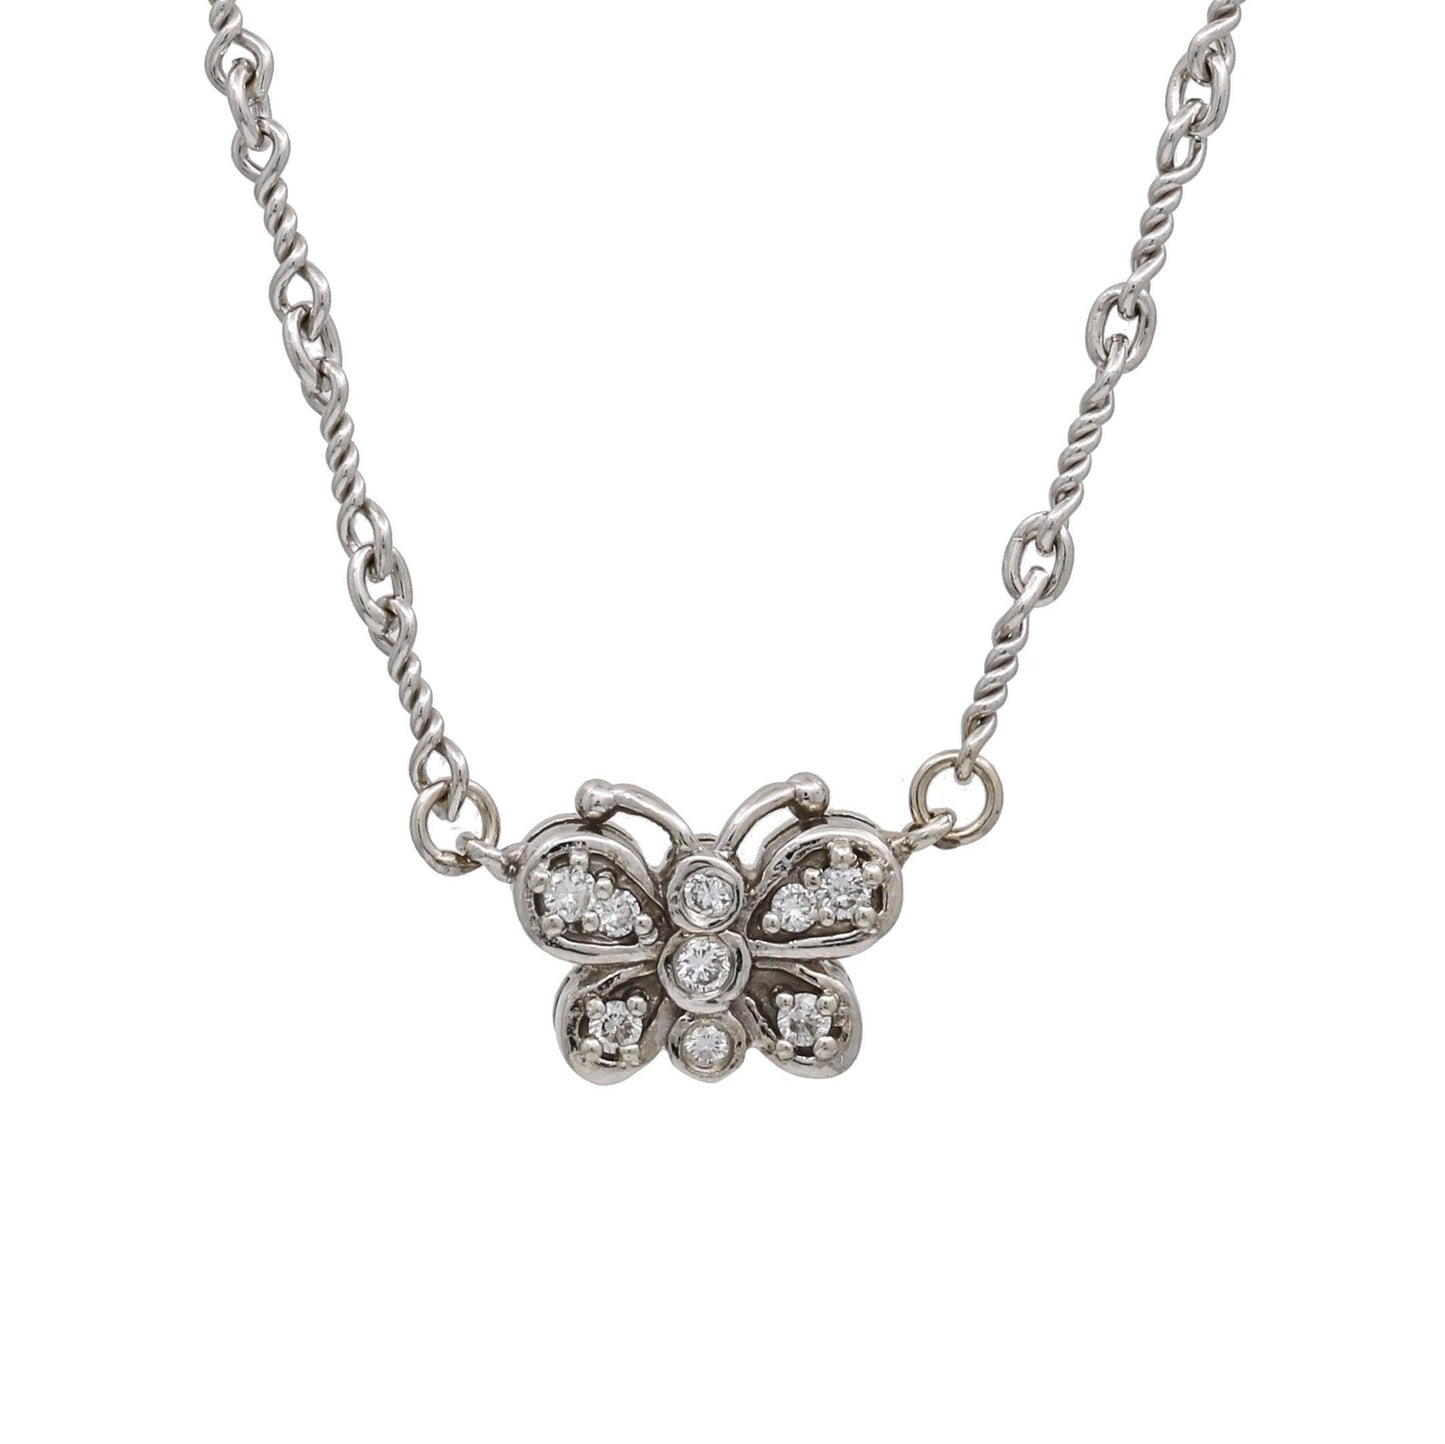 Women's 18k White Gold Necklace Mini Butterfly with Diamonds Charm - 31 Jewels Inc.